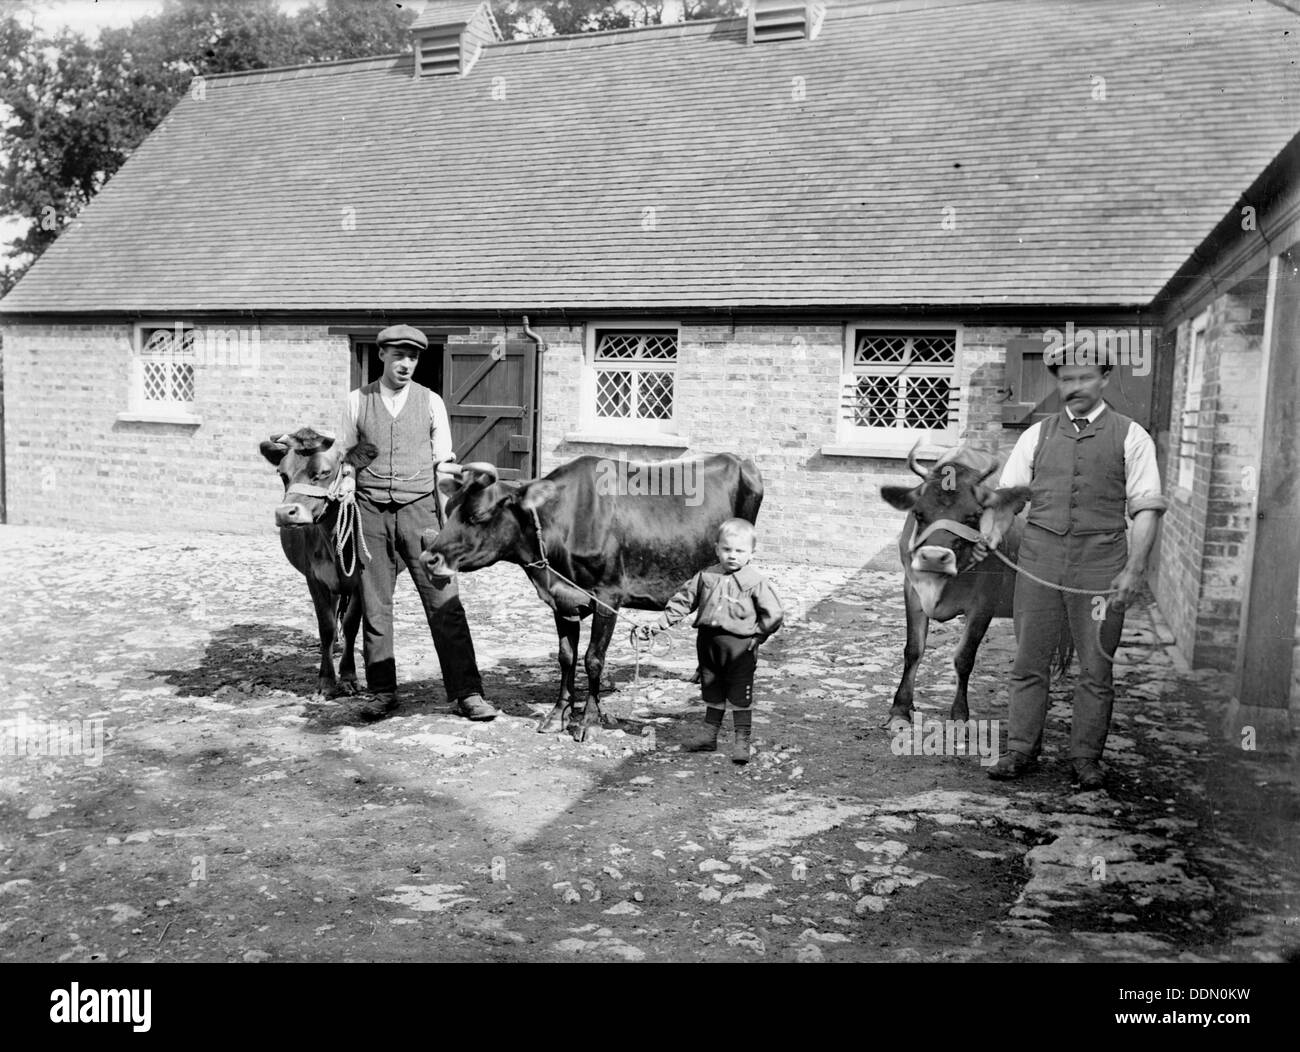 Agricultural Labourers 19th Century Stock Photos & Agricultural ...